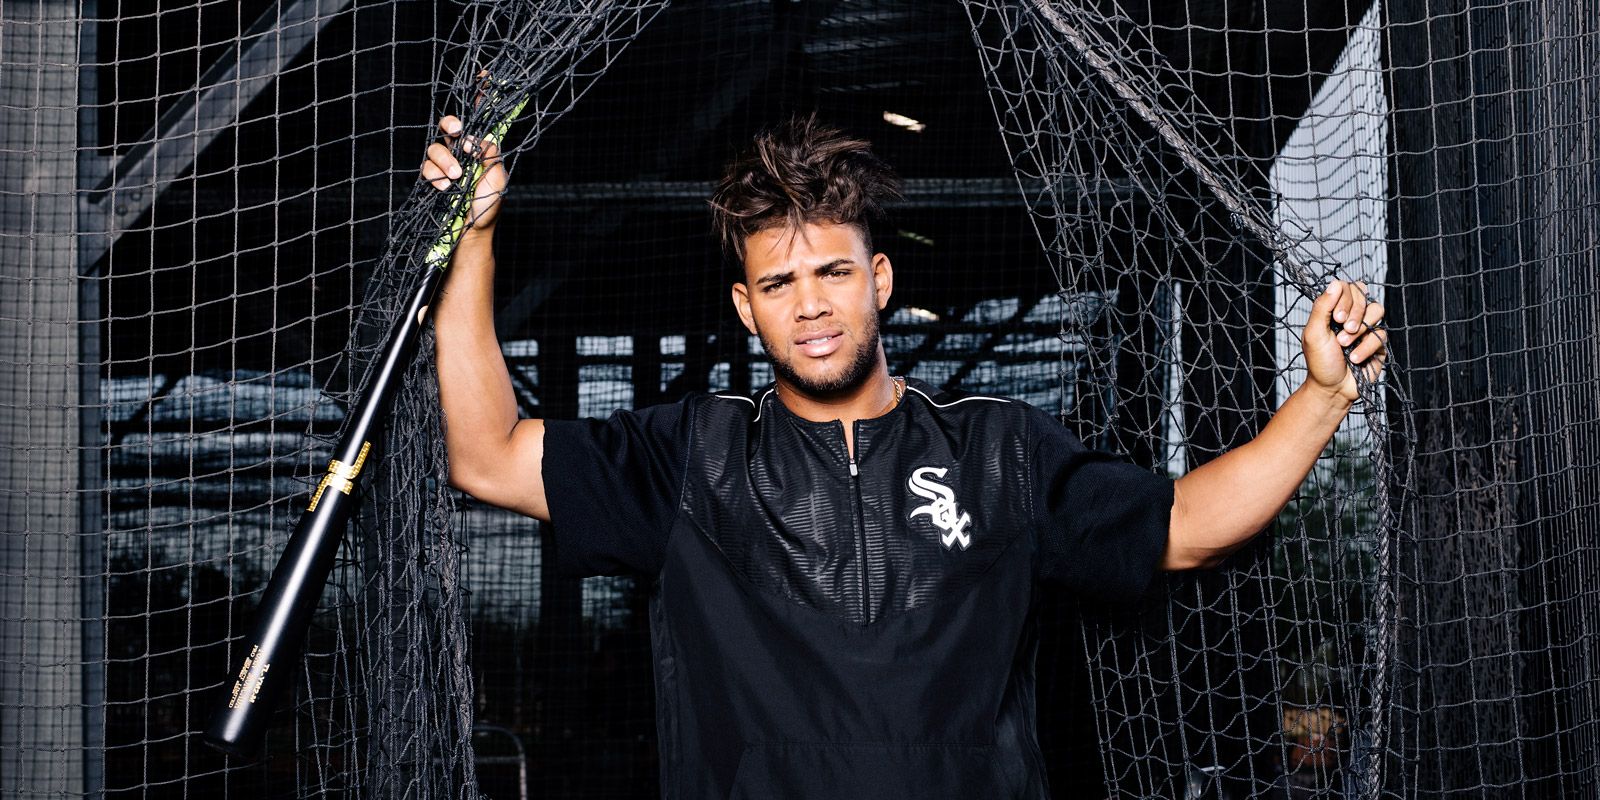 Chicago White Sox prospect Yoan Moncada is prepping for his major league  debut